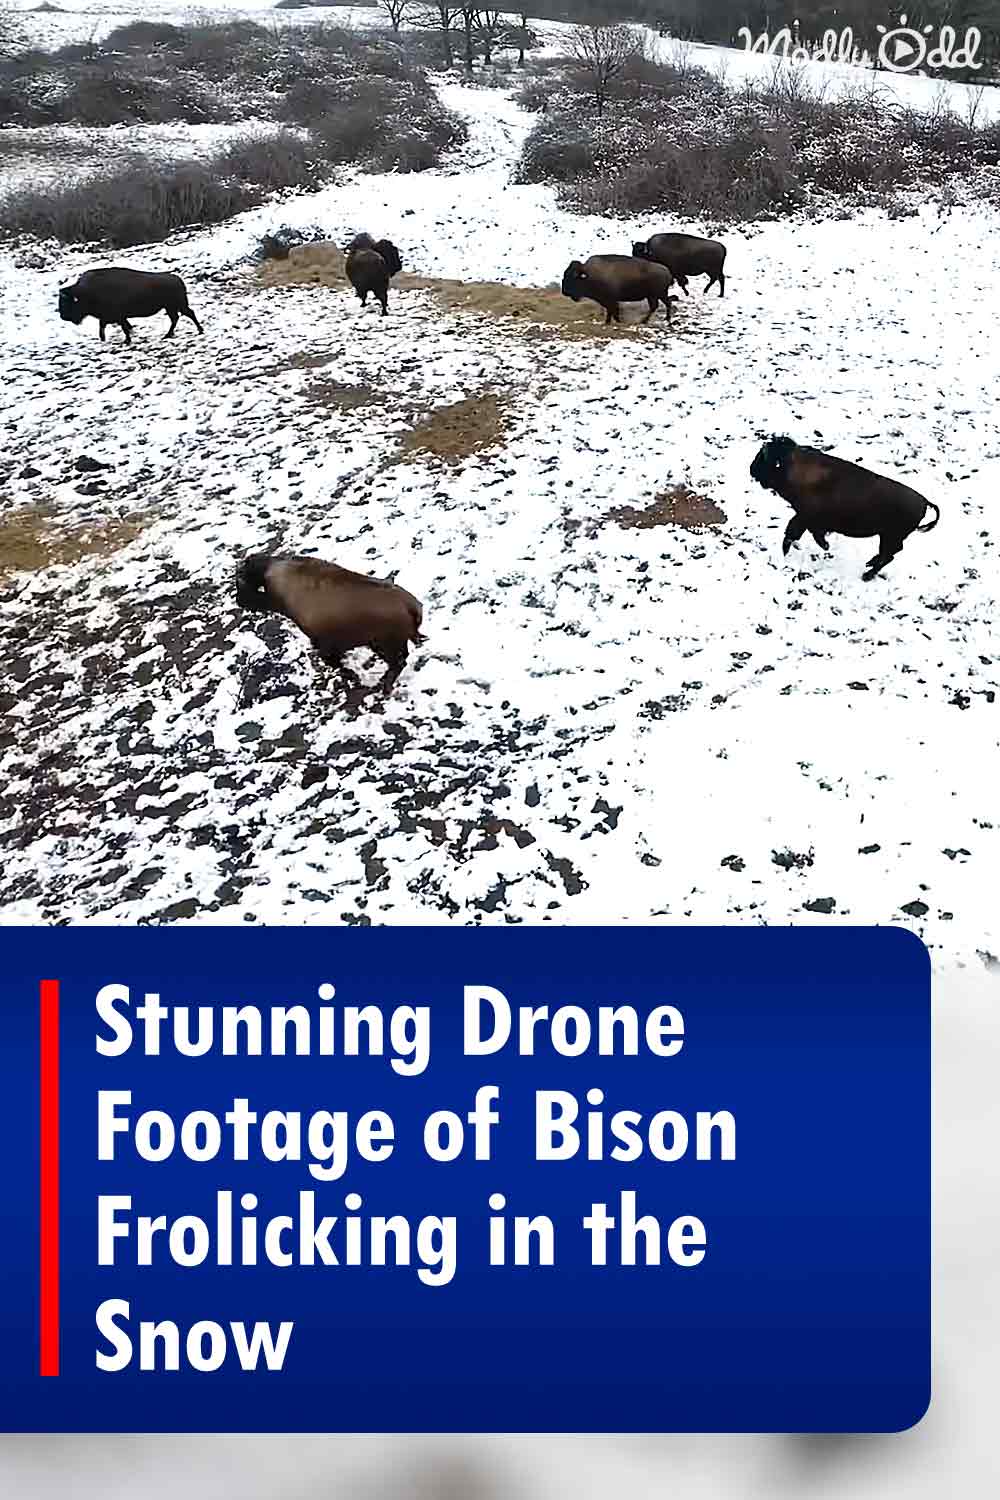 Stunning Drone Footage of Bison Frolicking in the Snow